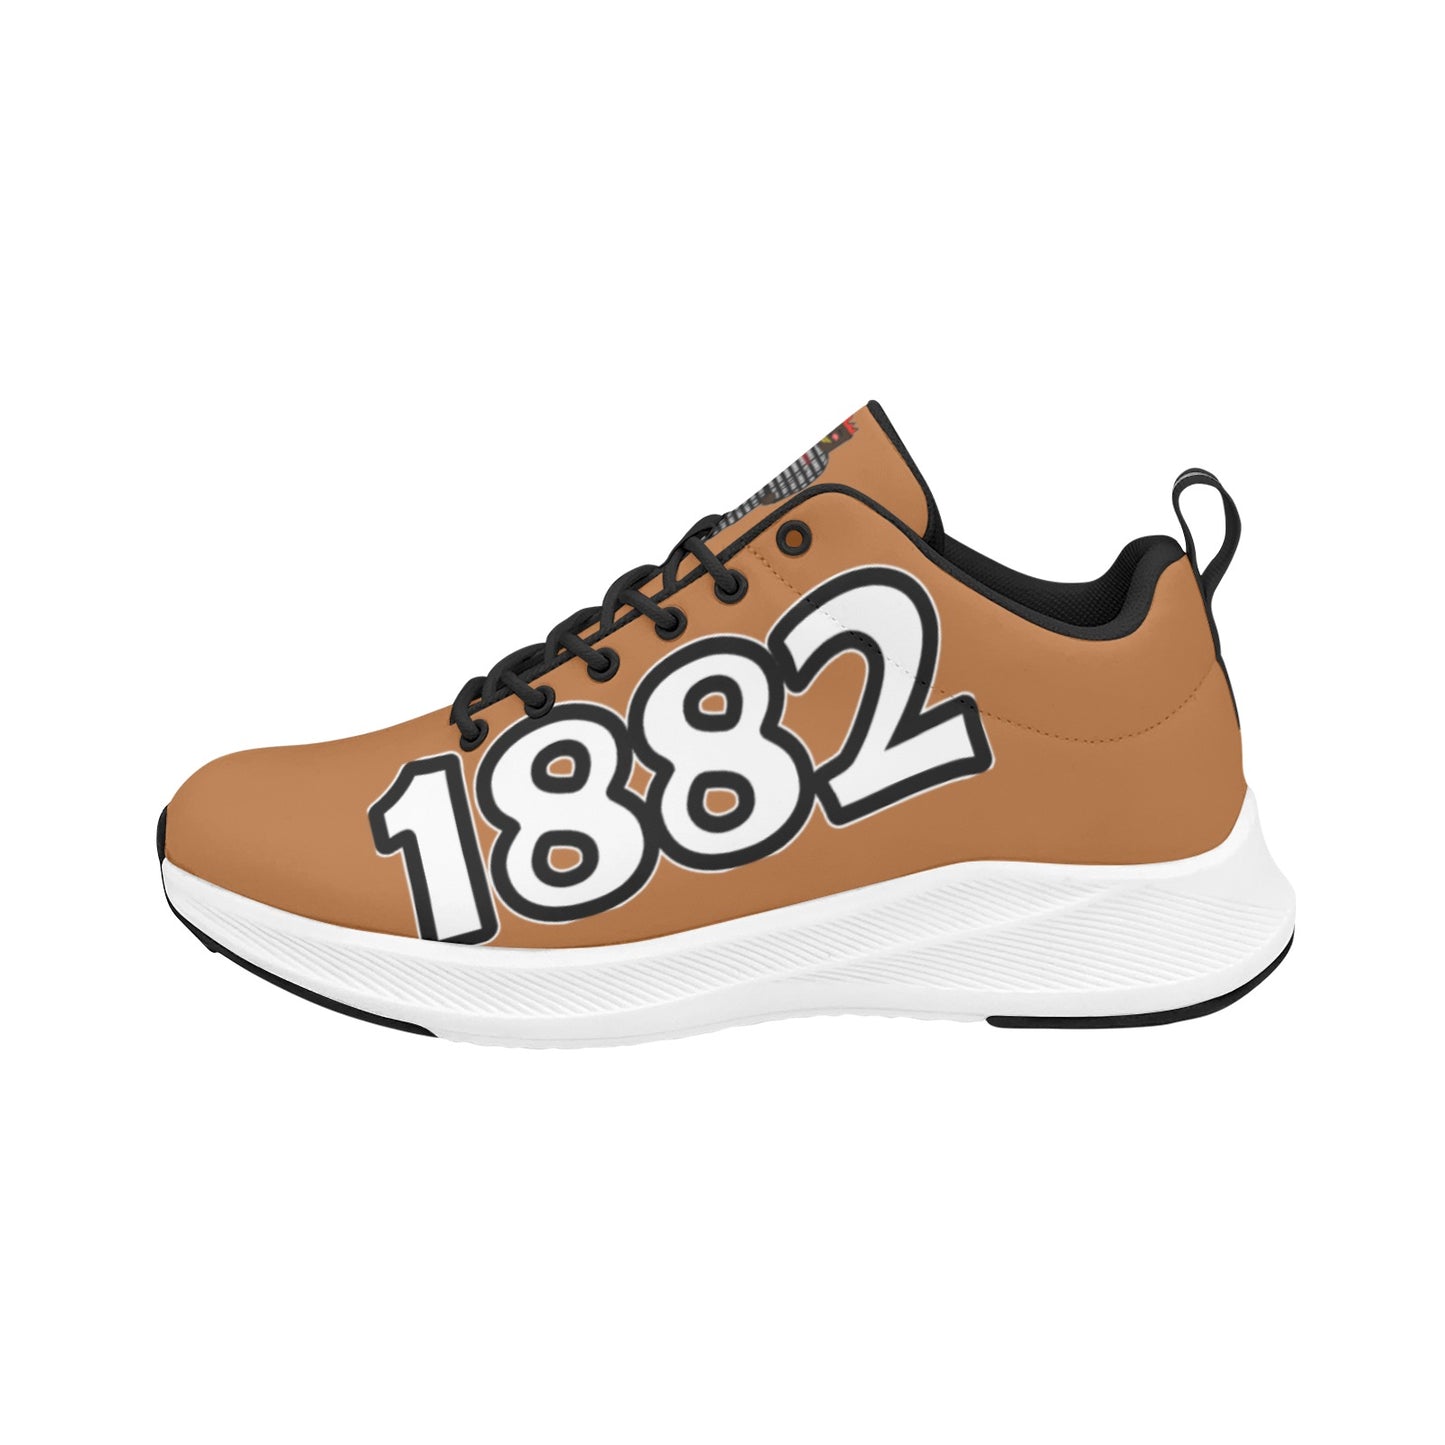 1882 CBZ RUNNERS SHOES